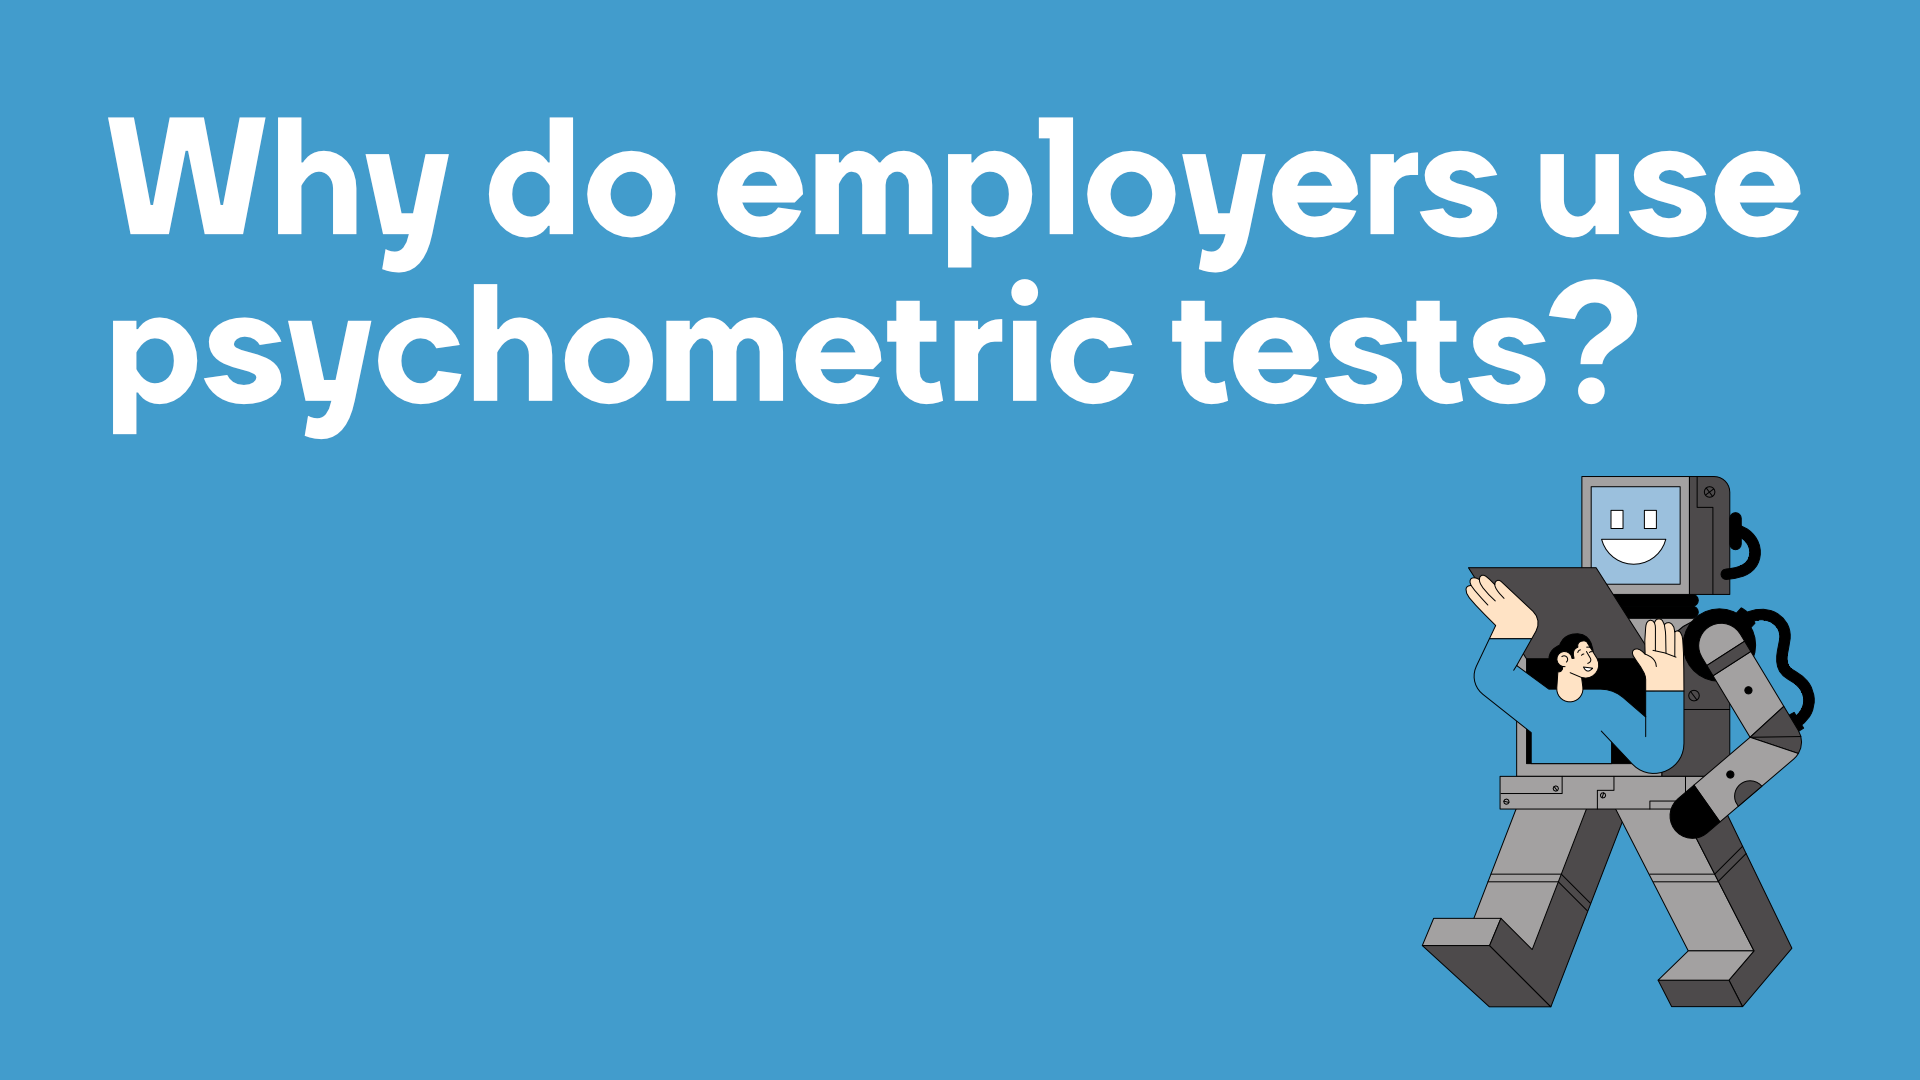 Why do employers use psychometric tests?